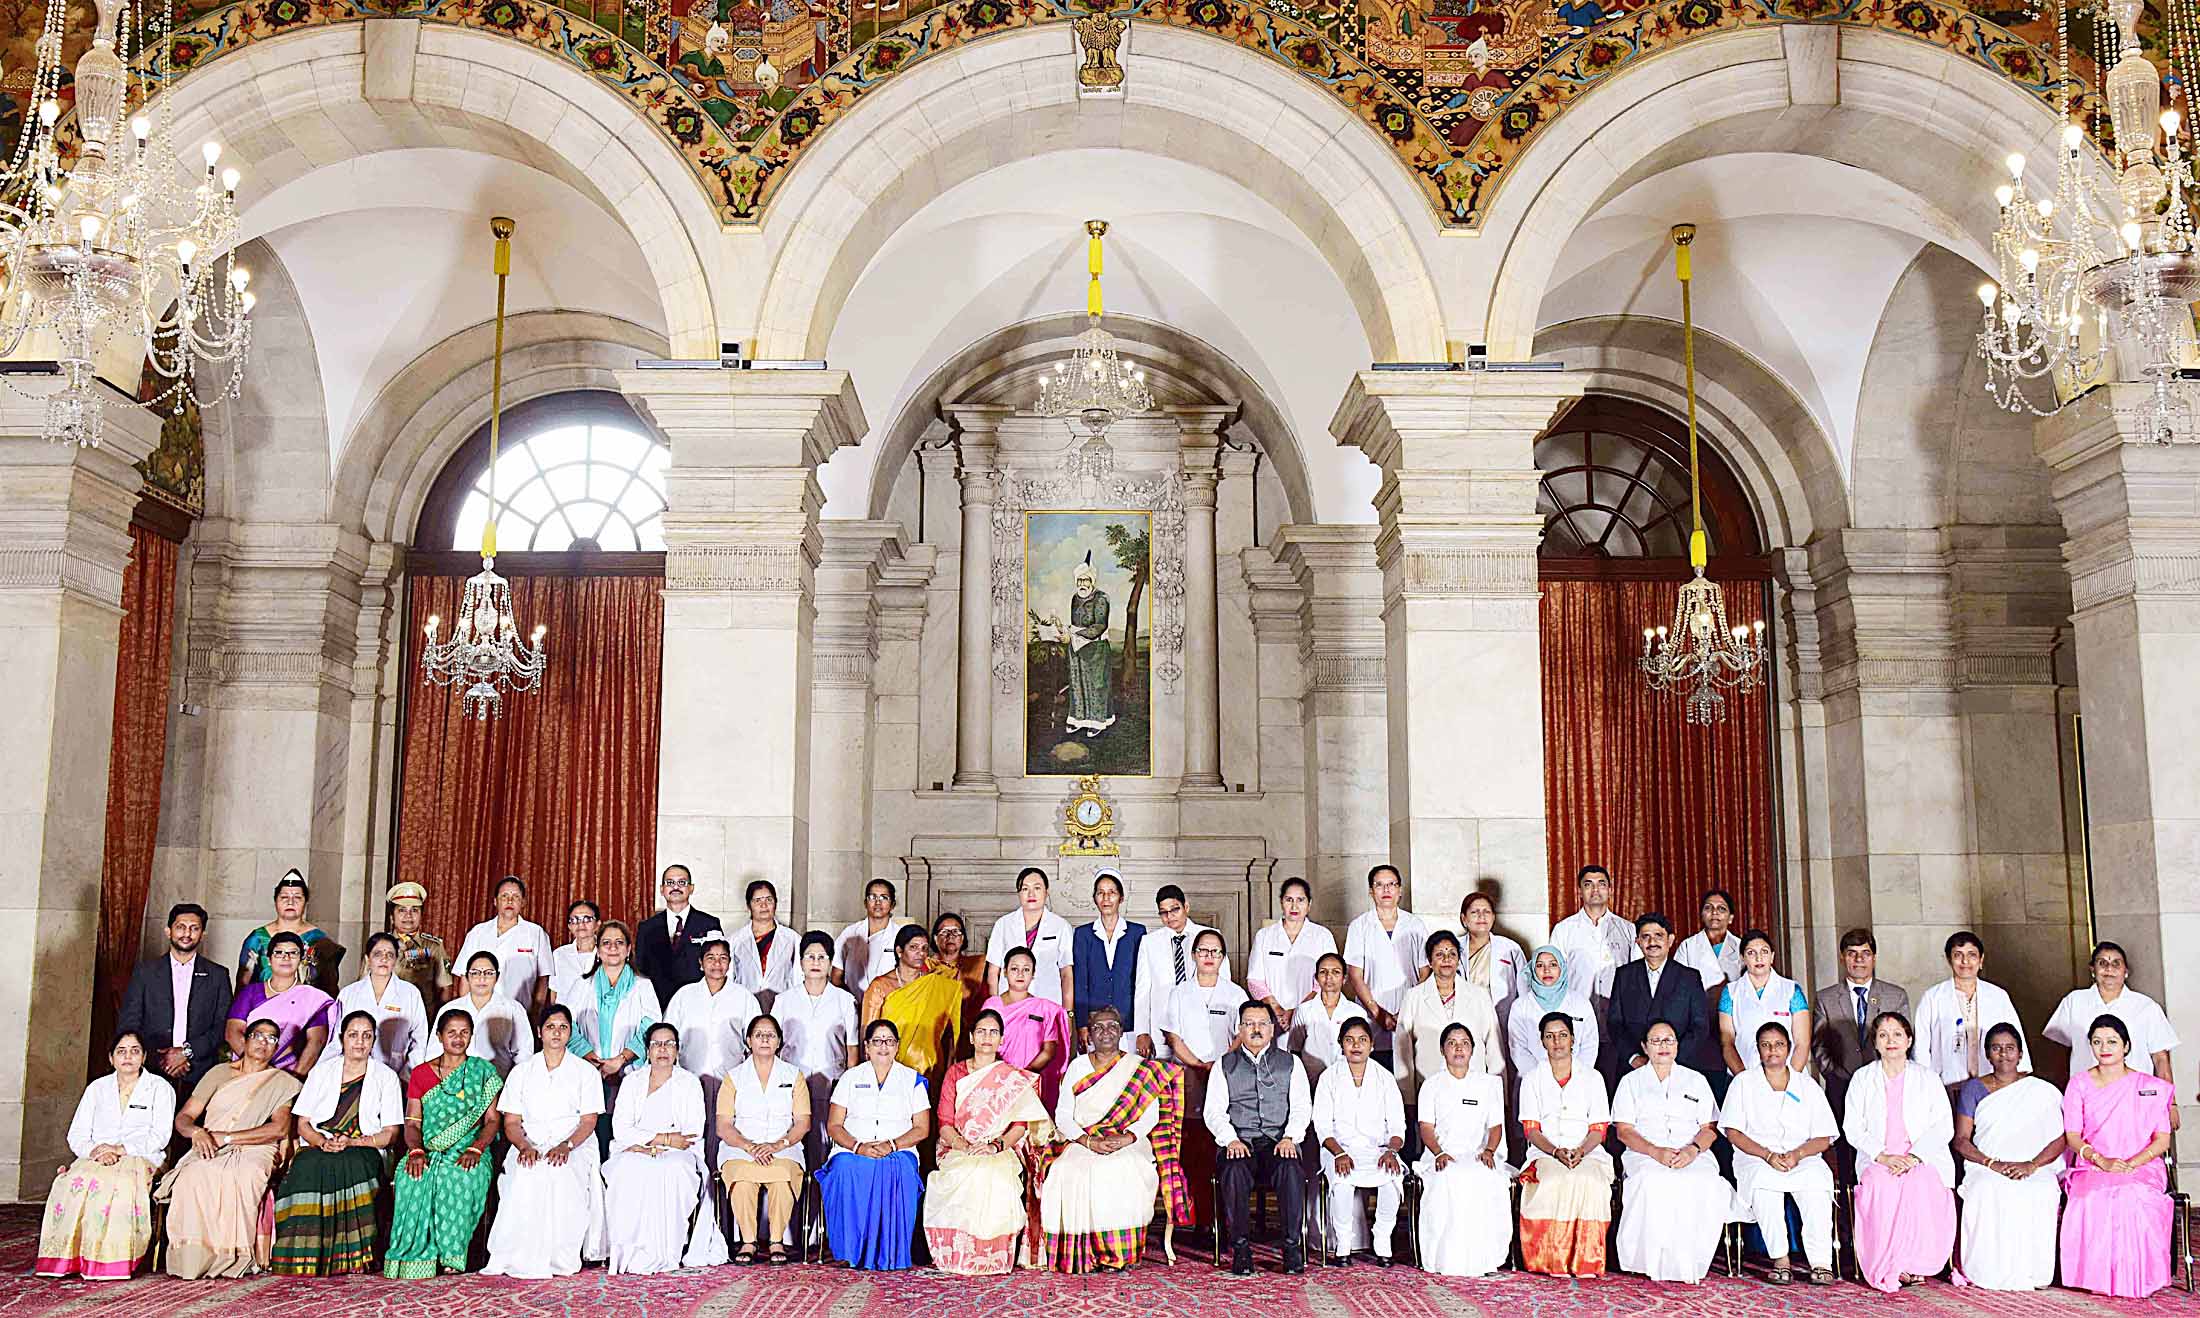 The President, Smt. Droupadi Murmu in a group photo with the awardees of National Florence Nightingale Awards, 2020 and 2021, in New Delhi on November 07, 2022.